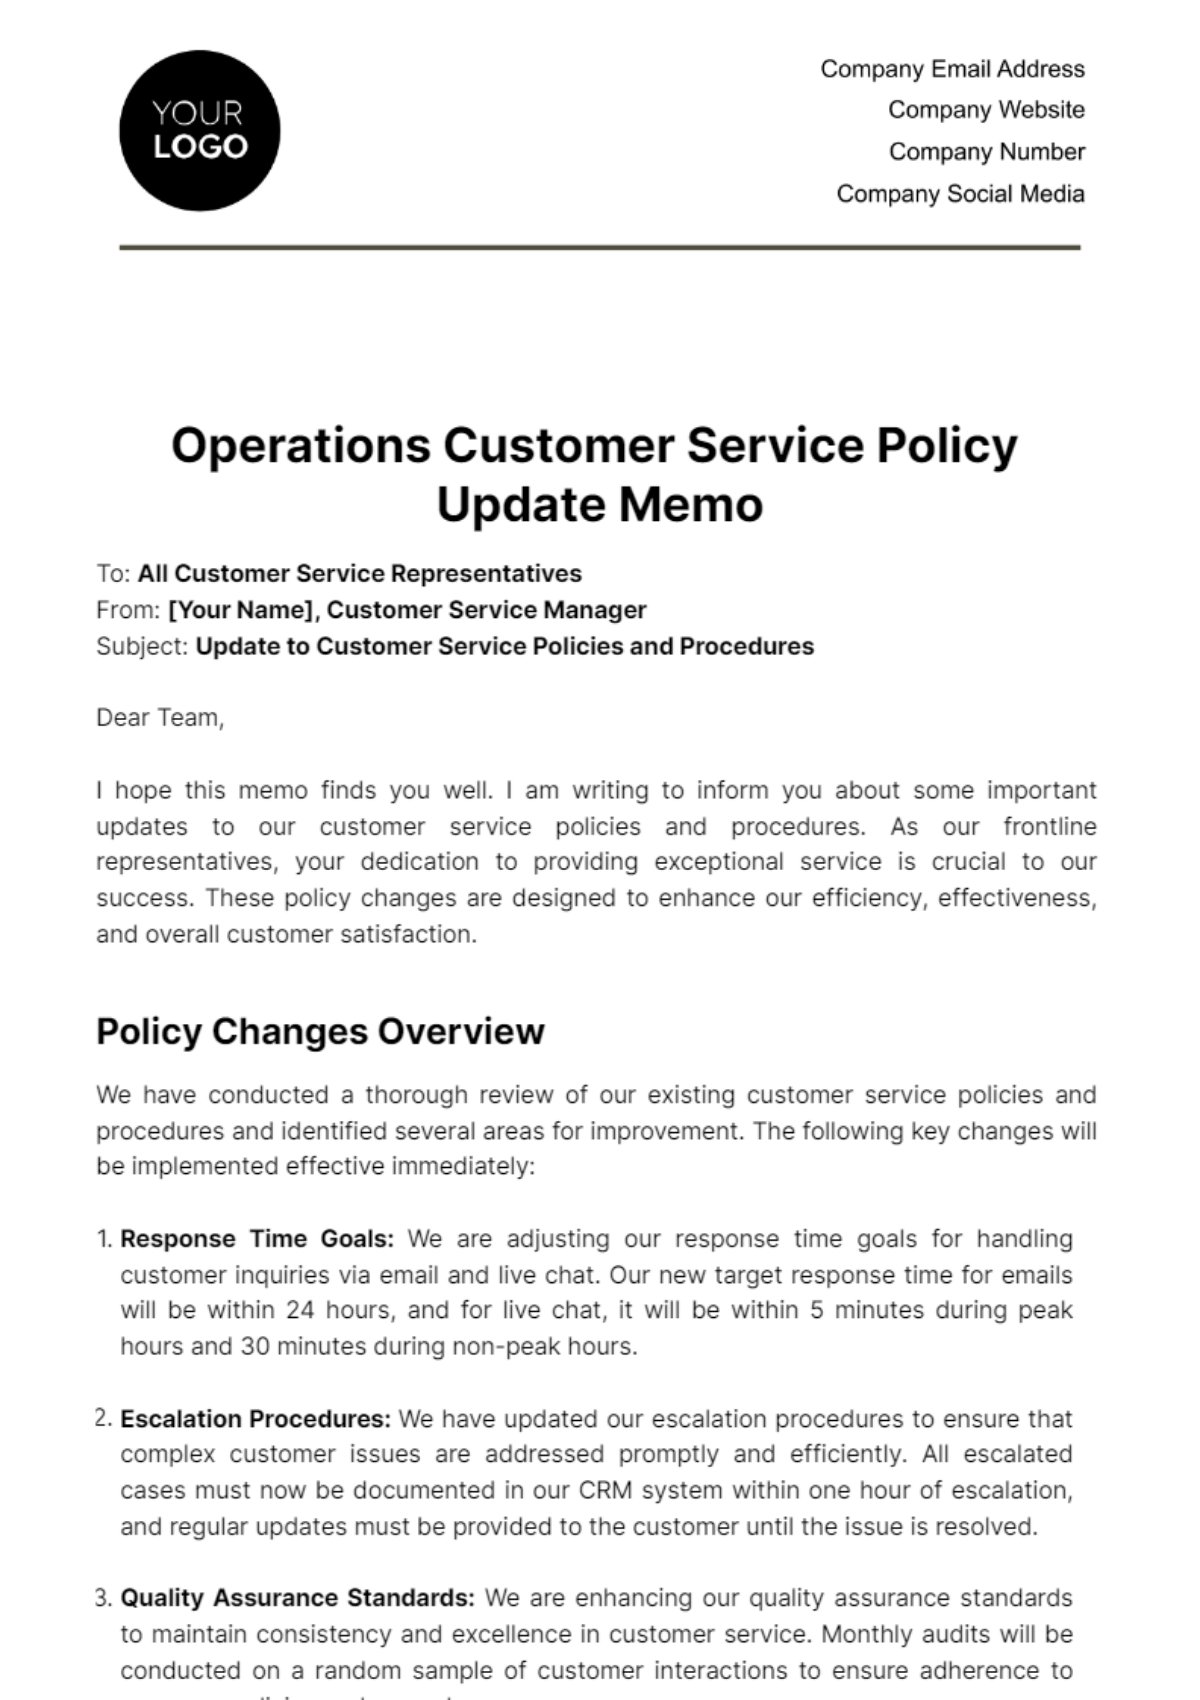 Free Operations Customer Service Policy Update Memo Template